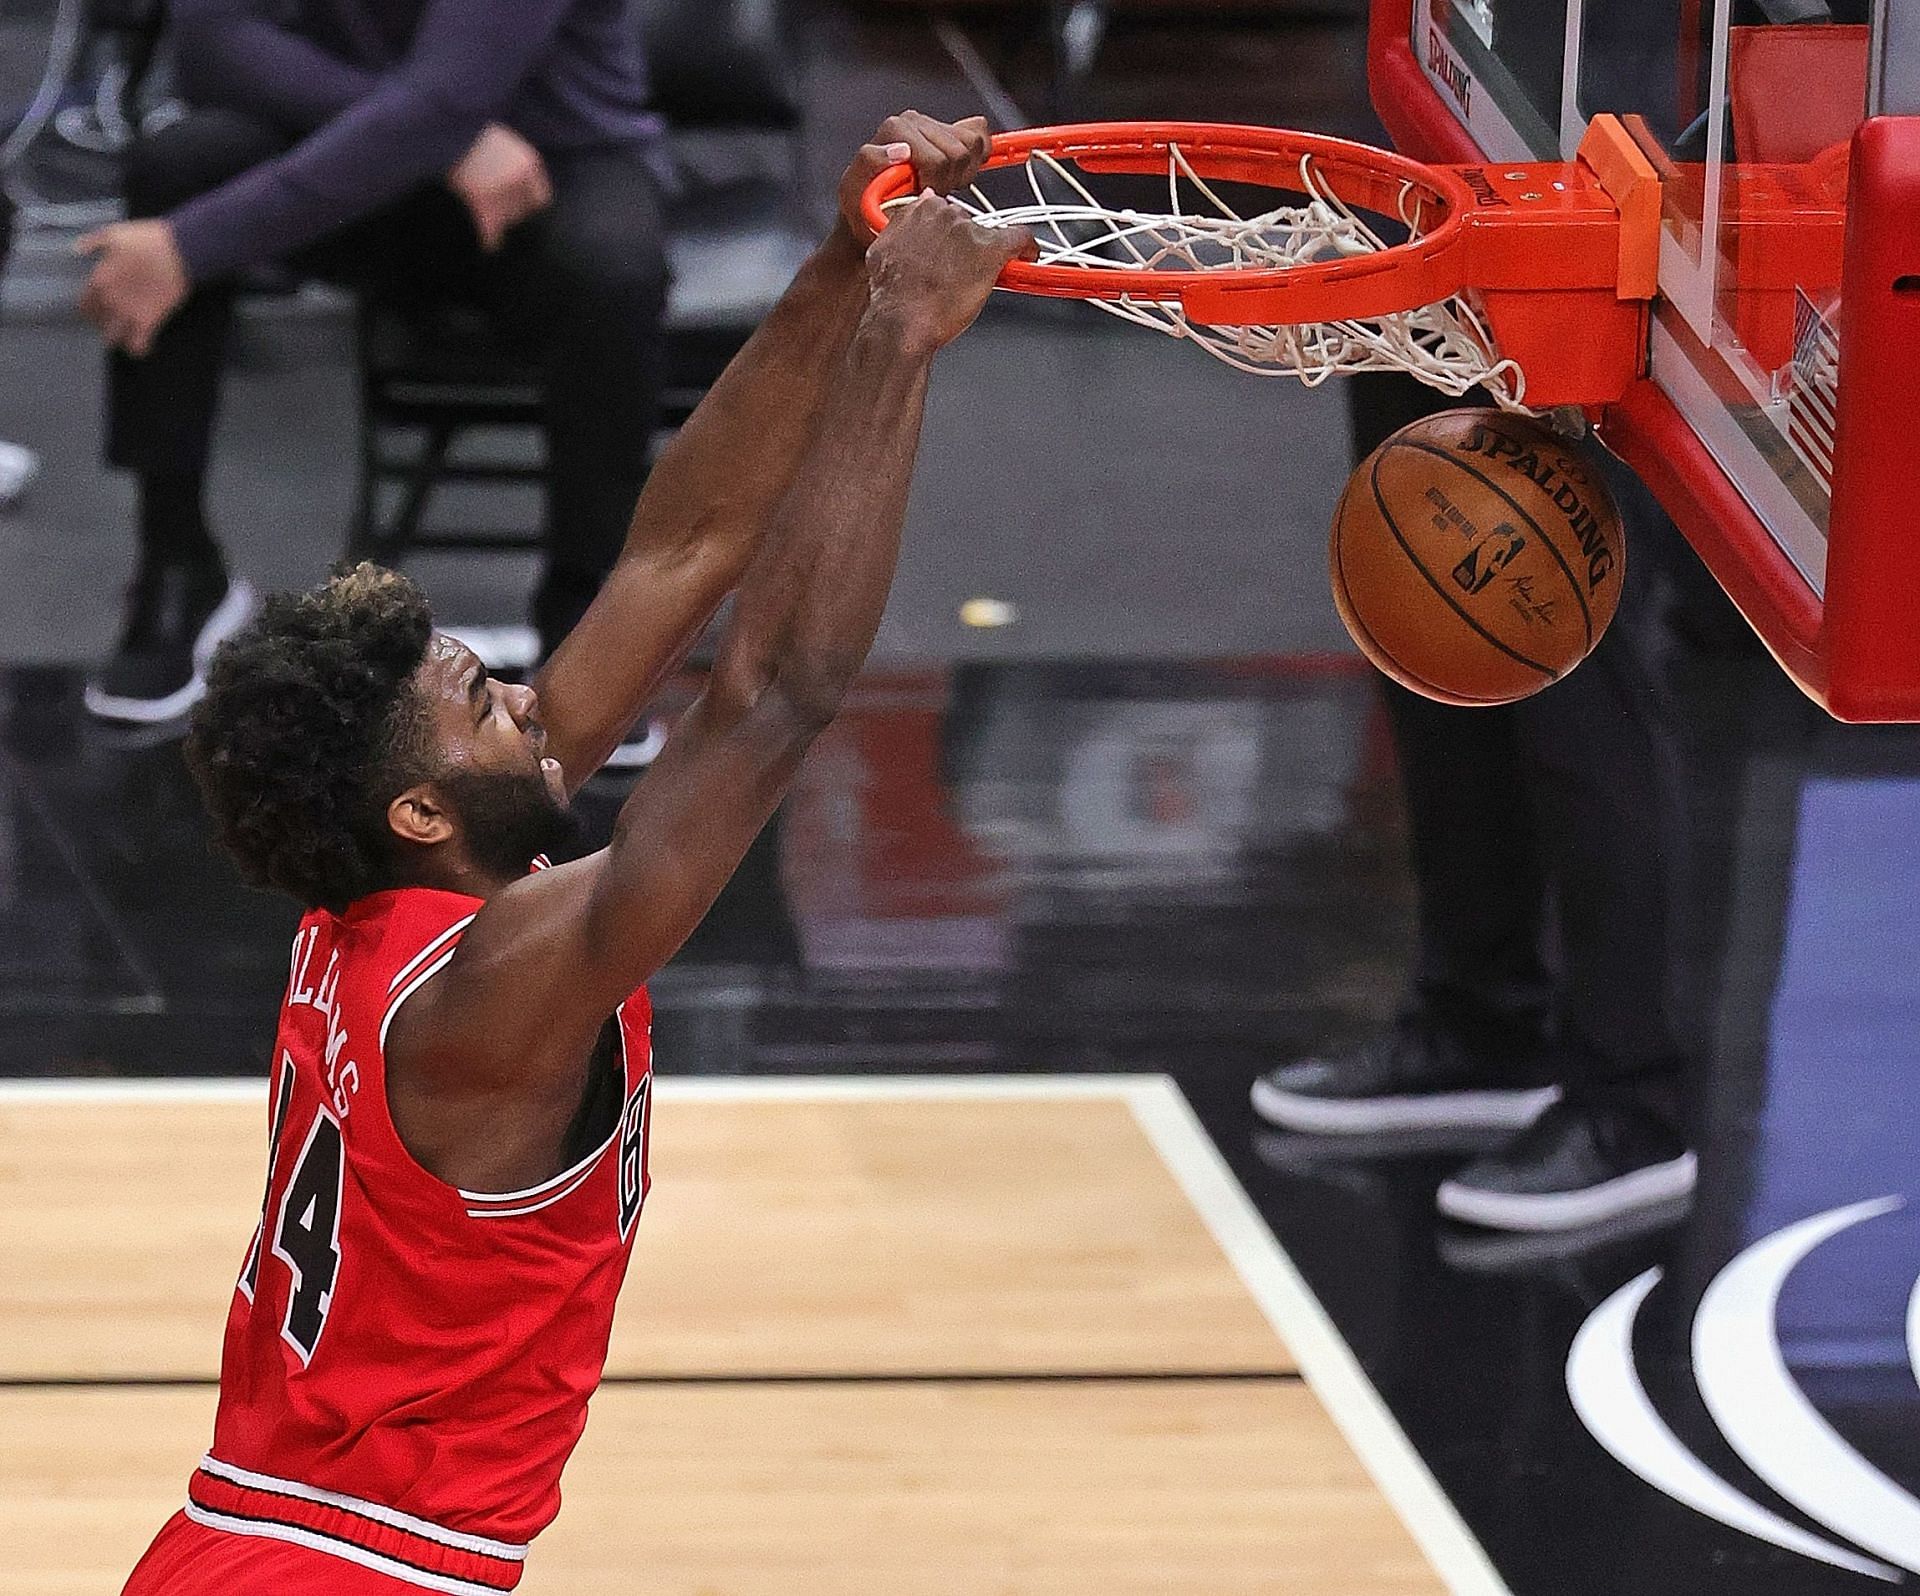 Chicago Bulls young forward Patrick Williams dunking the ball